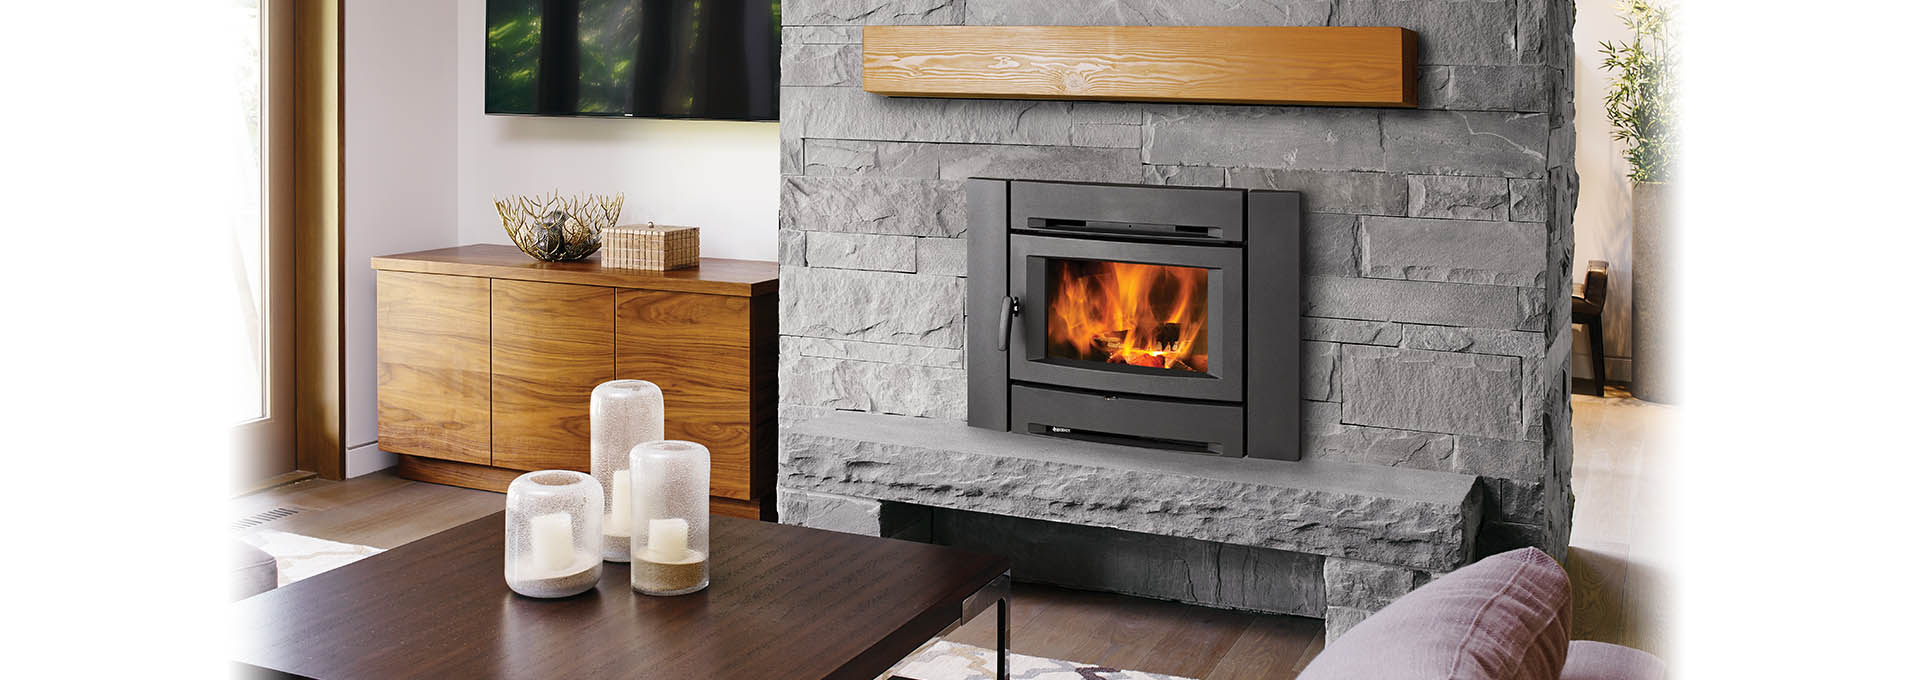 Regency CI1150 Wood Insert with dark grey surround and wood mantle